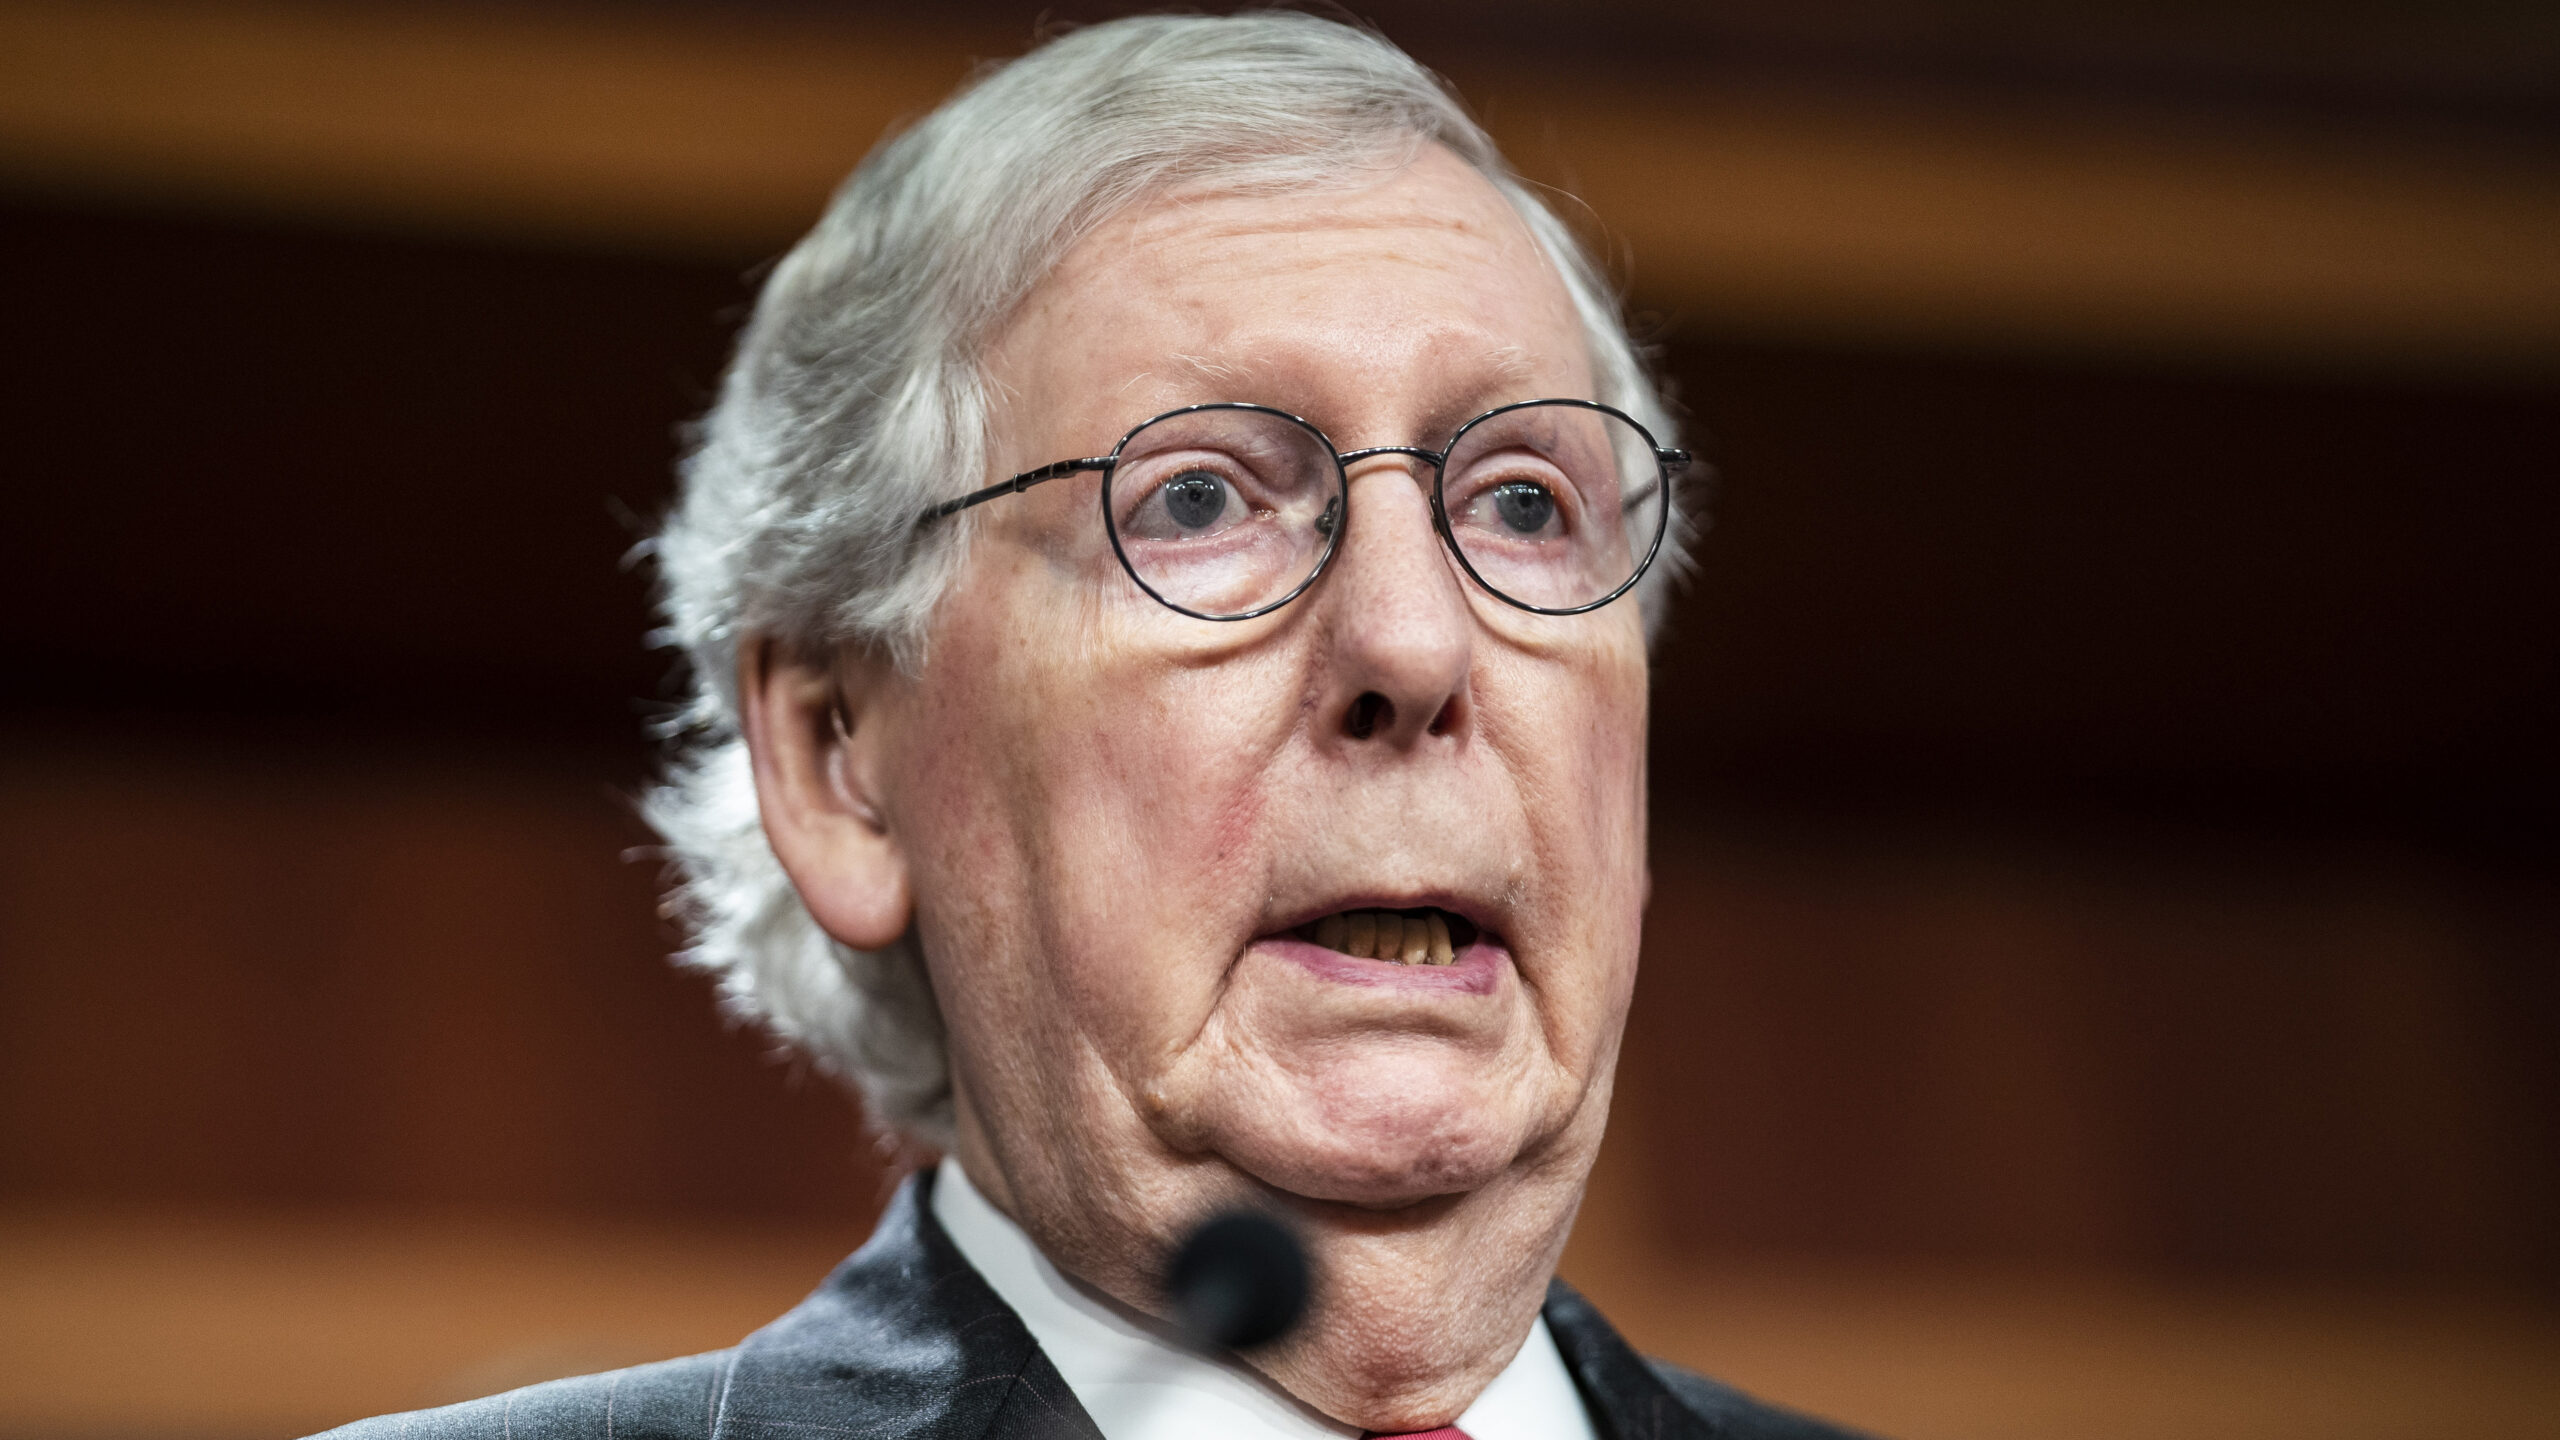 Senate Minority Leader Mitch McConnell Discharged From Hospital